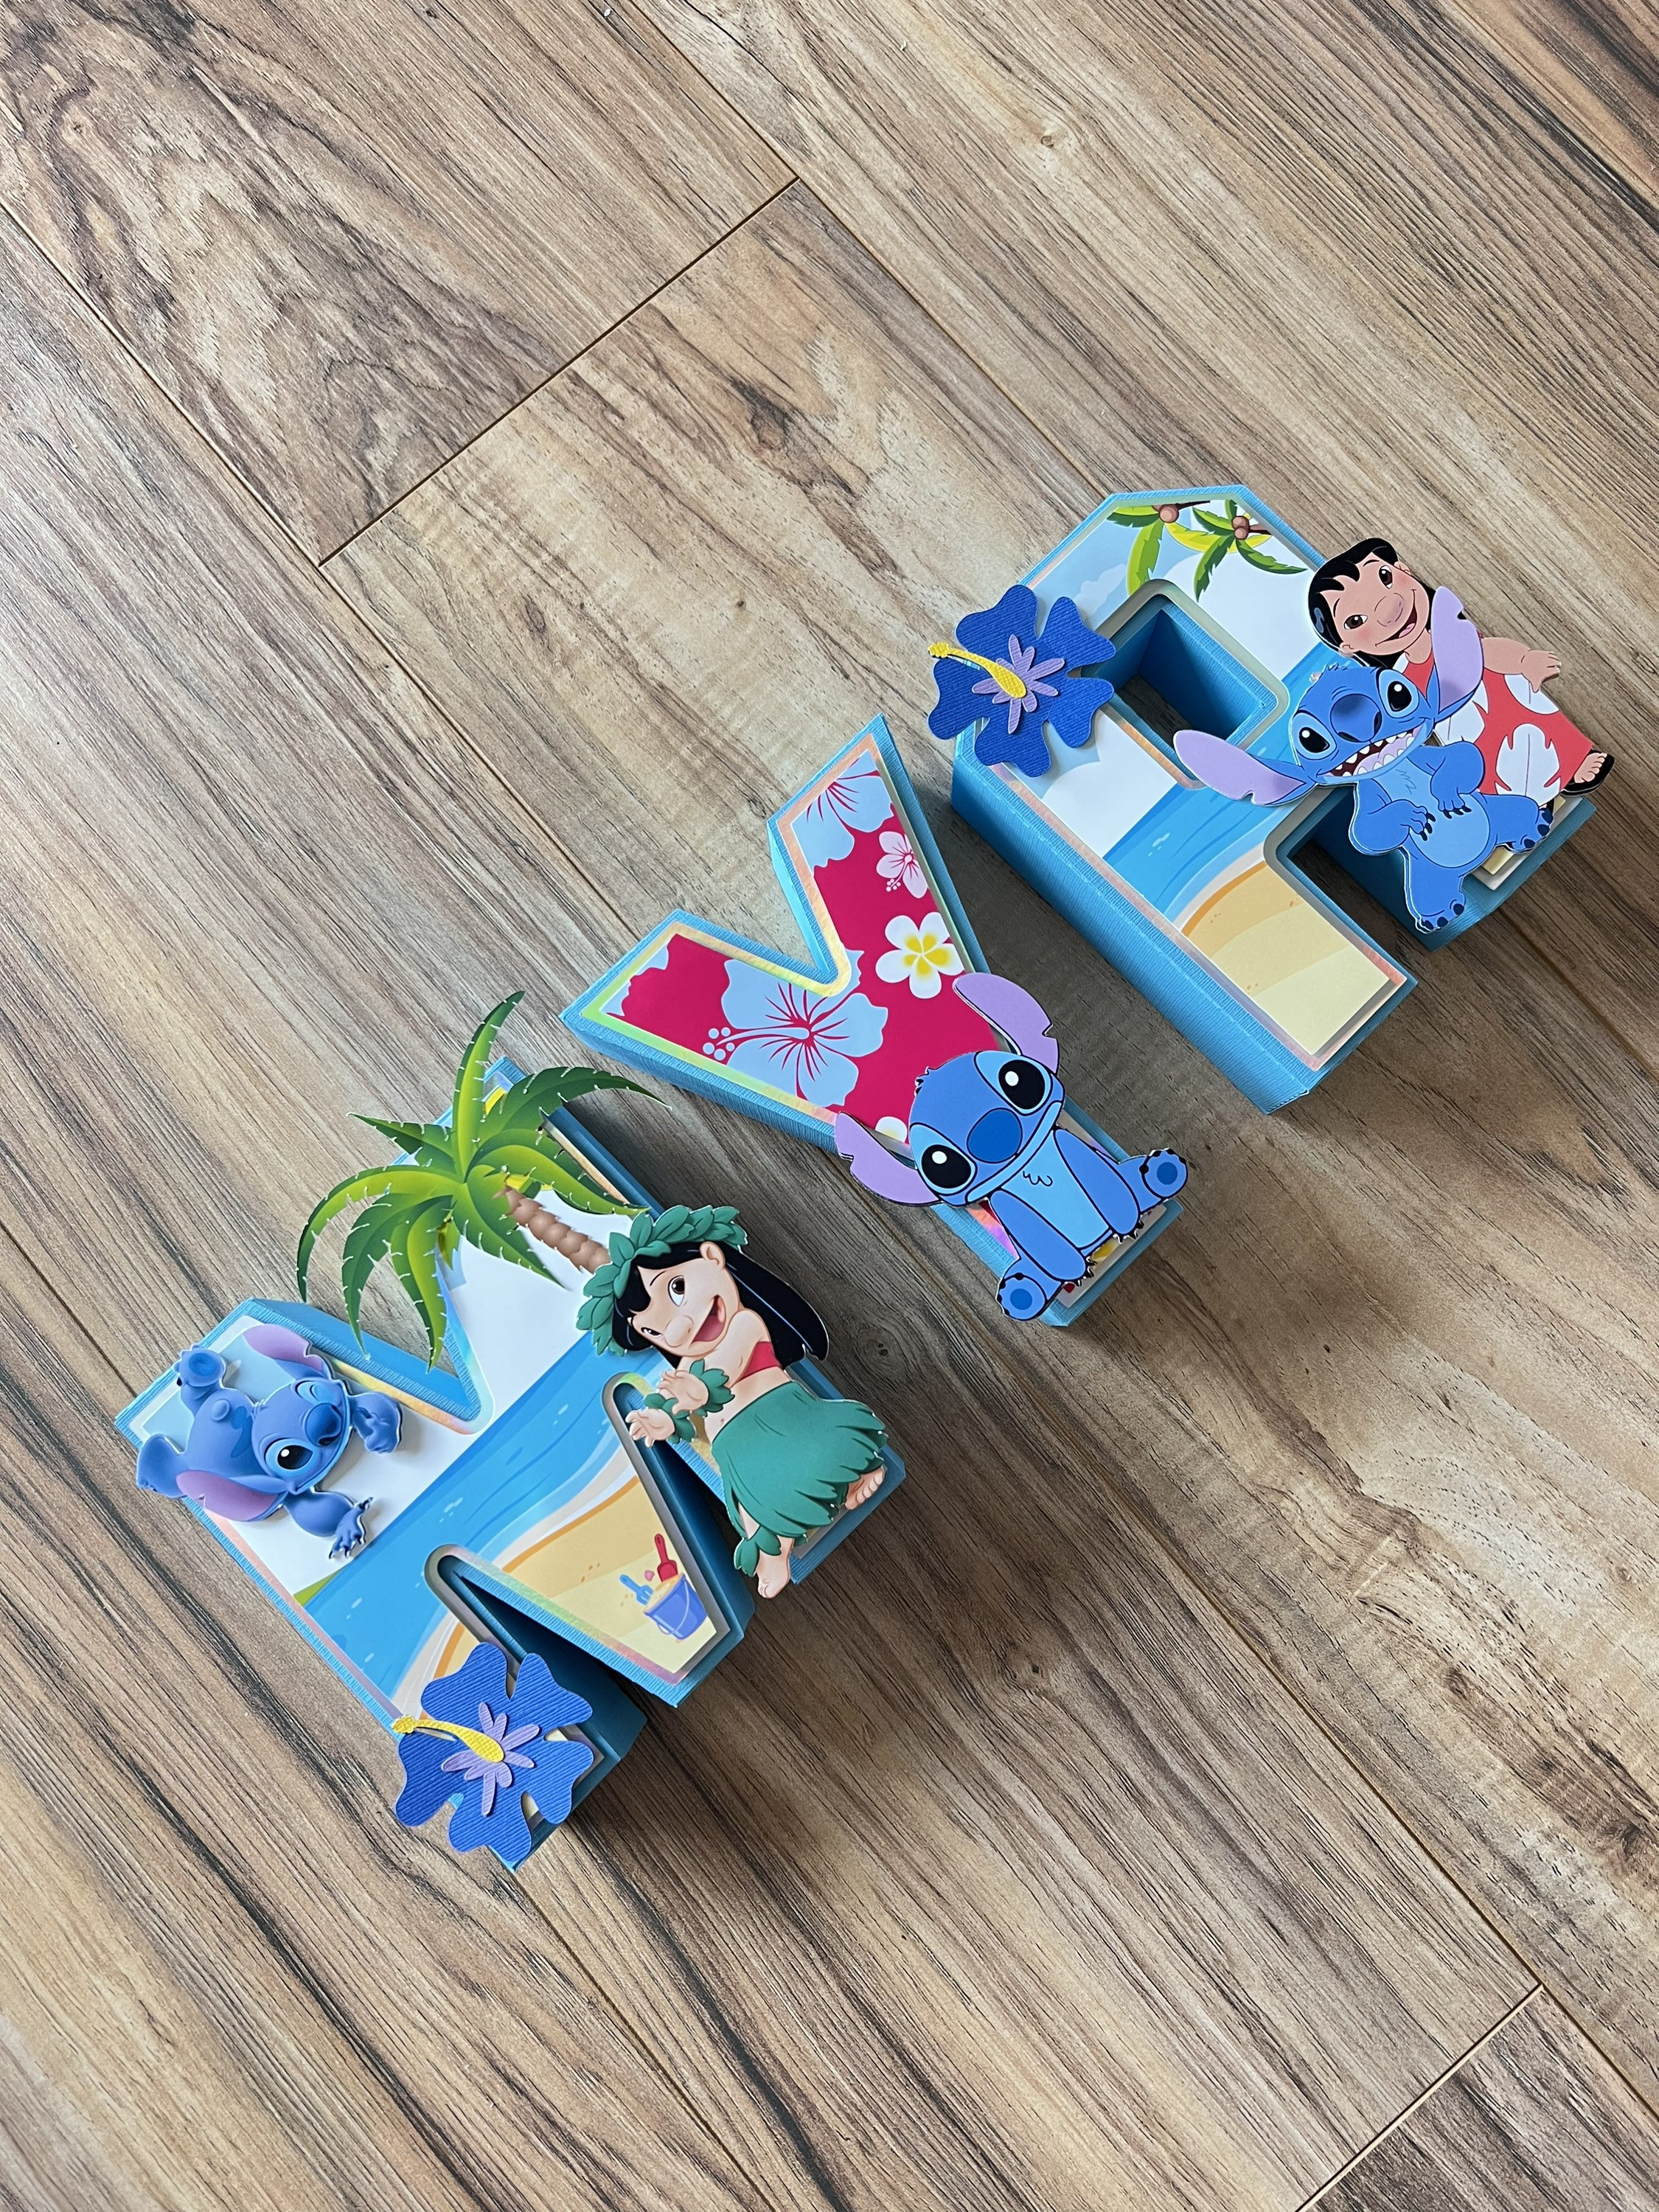 EDITABLE Lilo and Stitch Party Favors, Lilo & Stitch Party Kit